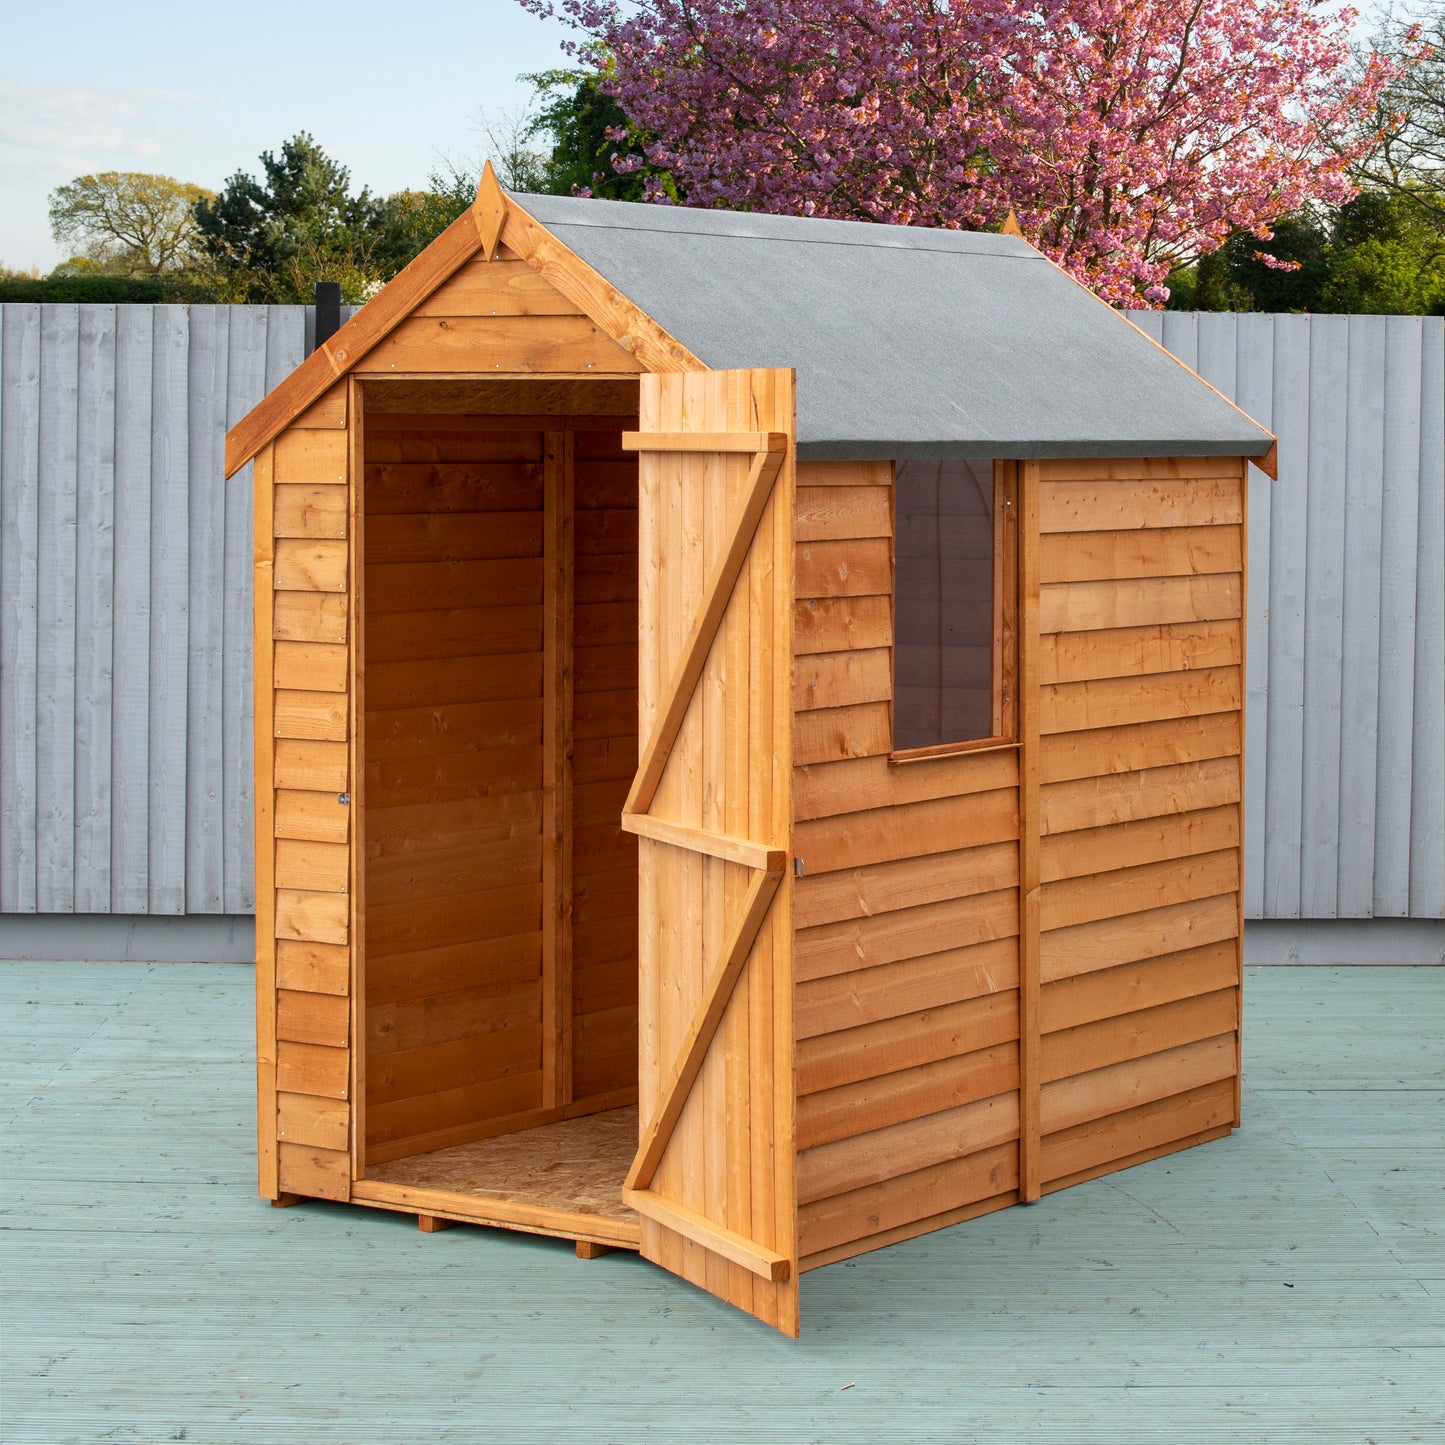 Shire 6 x 4 Overlap Value Dip Treated Garden Shed with Window - Premium Garden